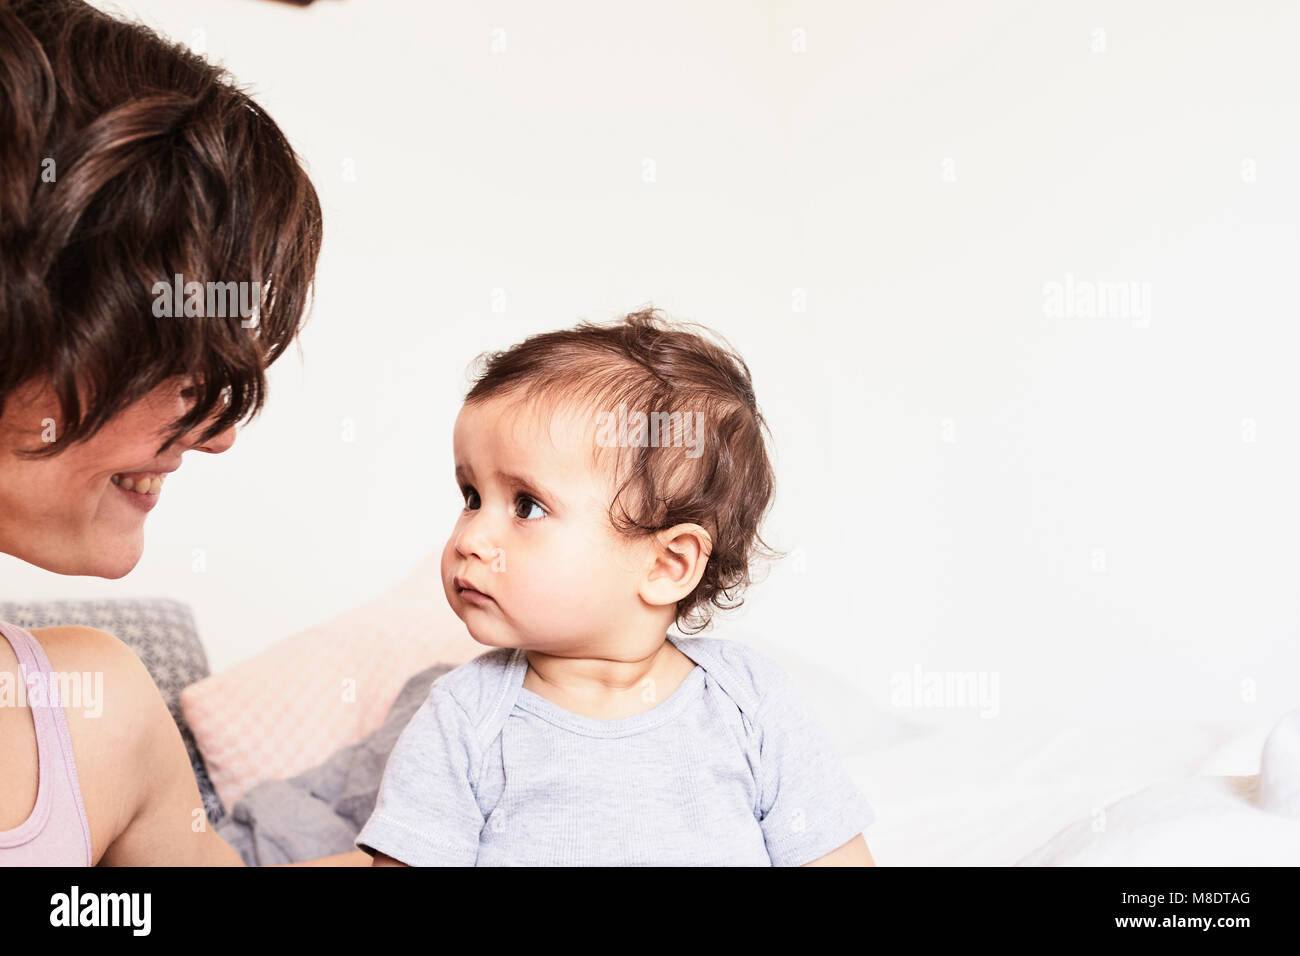 Mother sitting face to face with baby daughter, baby daughter with sad expression Stock Photo